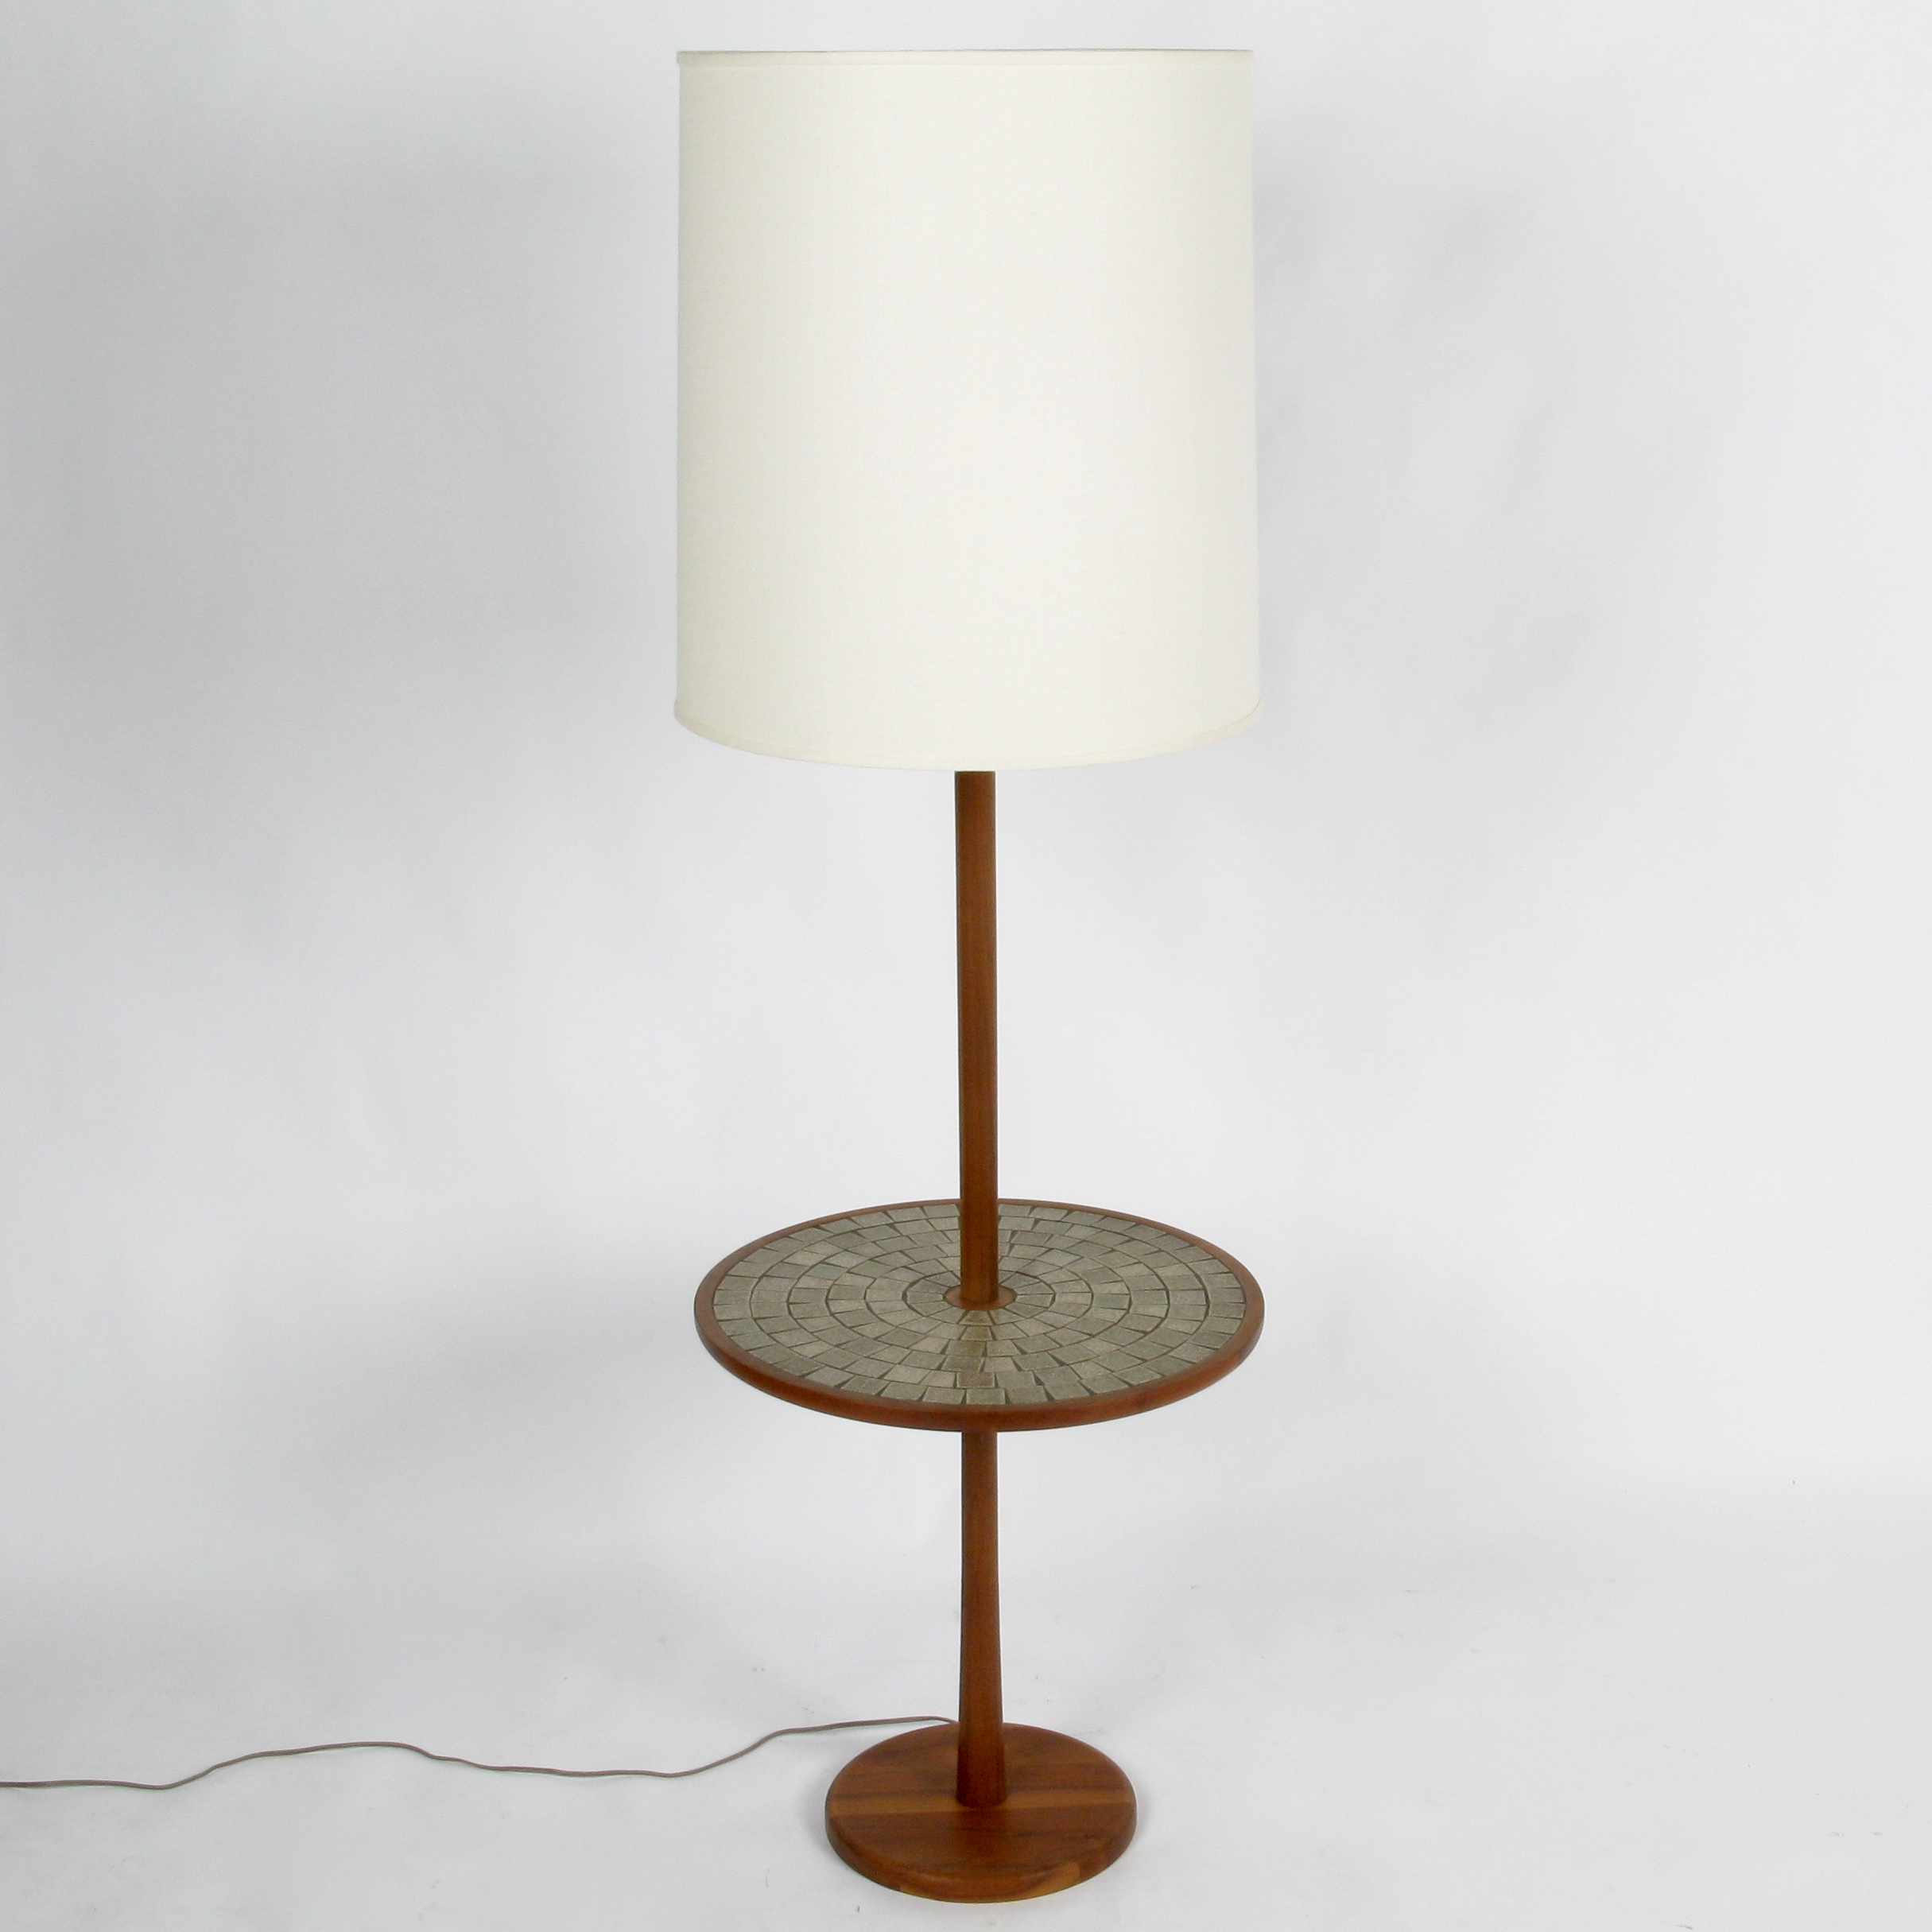 Martz Floor Lamp With Table for size 2430 X 2430